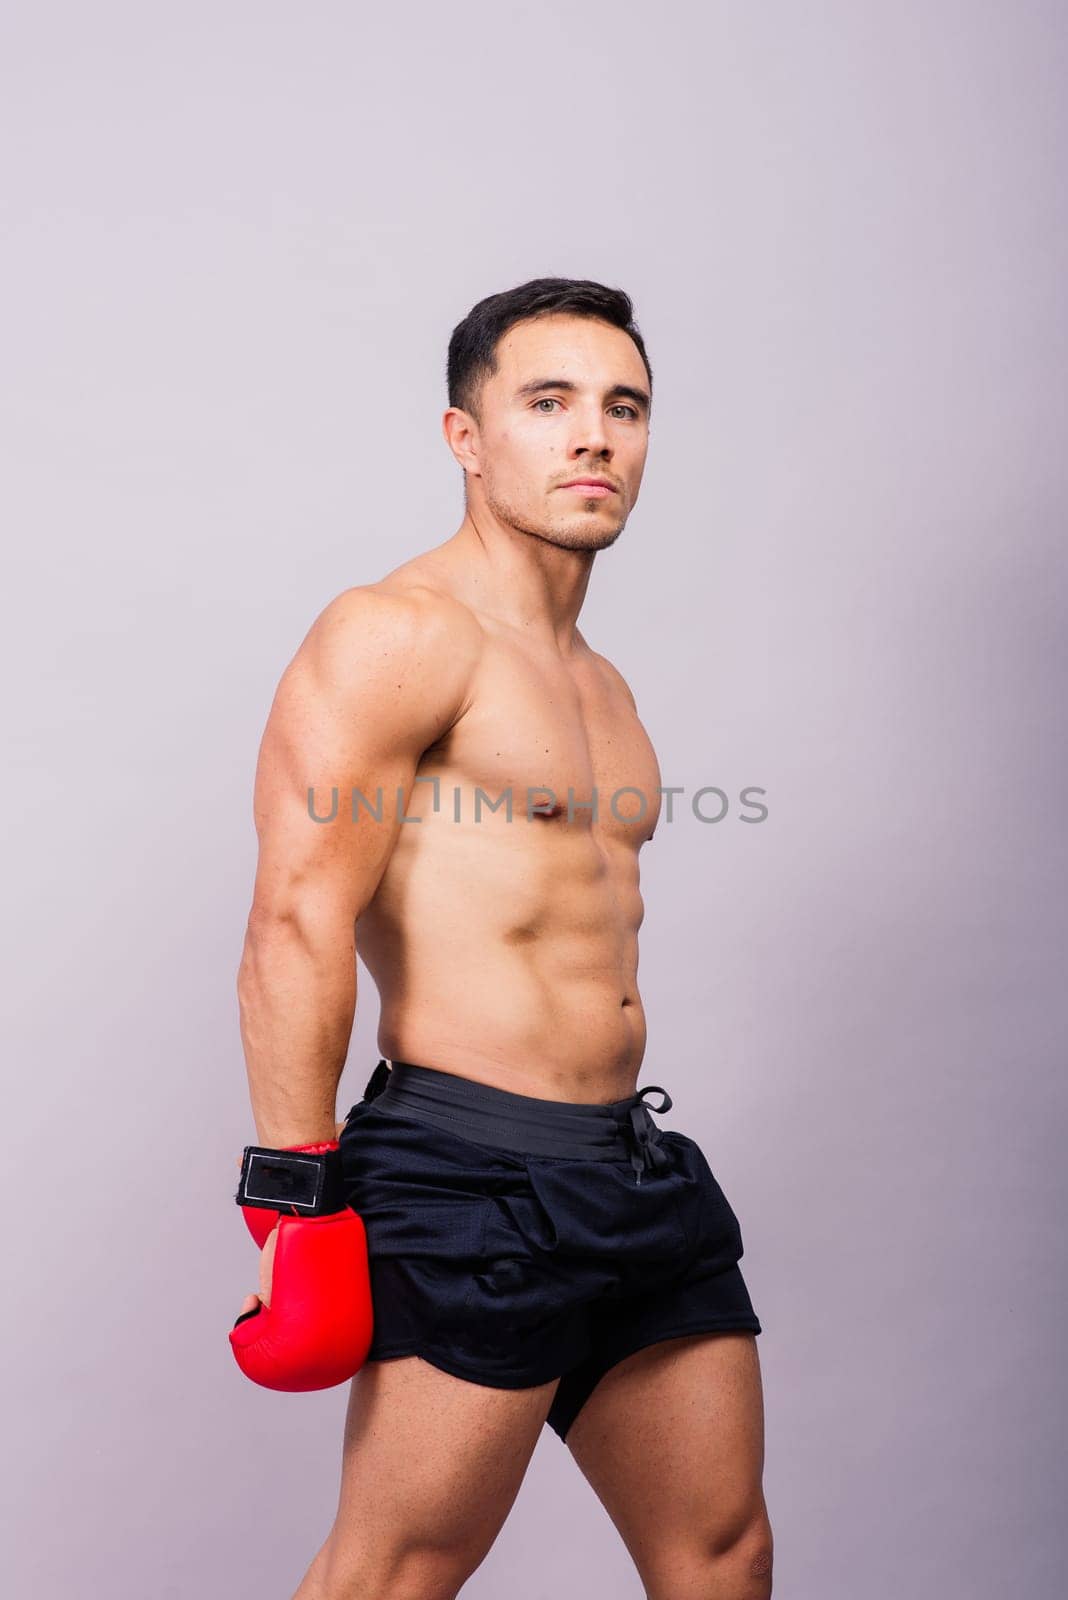 Boxing gloves, man training in a sports fight, challenge or mma competition on studio background.